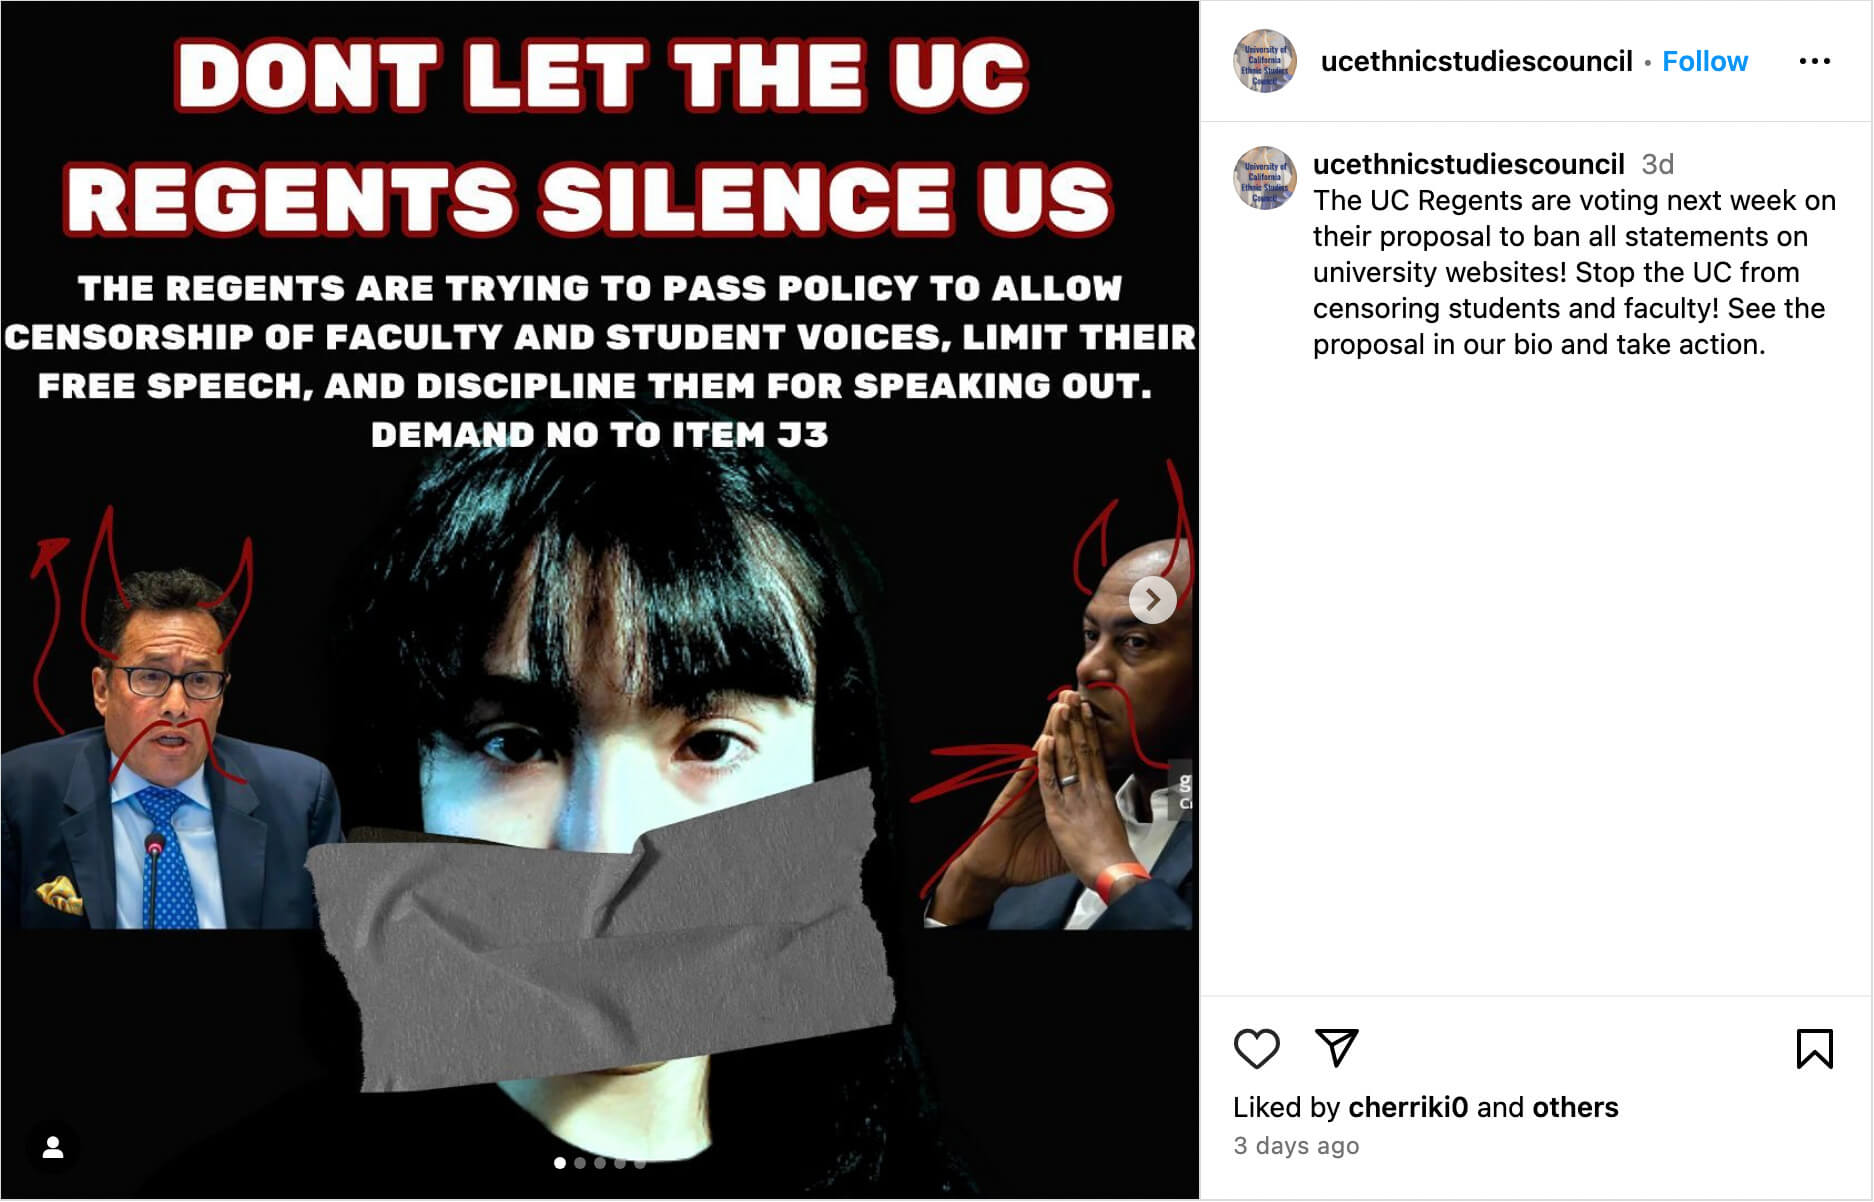 An Instagram post by the UC Ethnic Studies Faculty Council calls on supporters to publicly oppose a proposal by the University of California Board of Regents that would limit the use of public university channels for political expression.